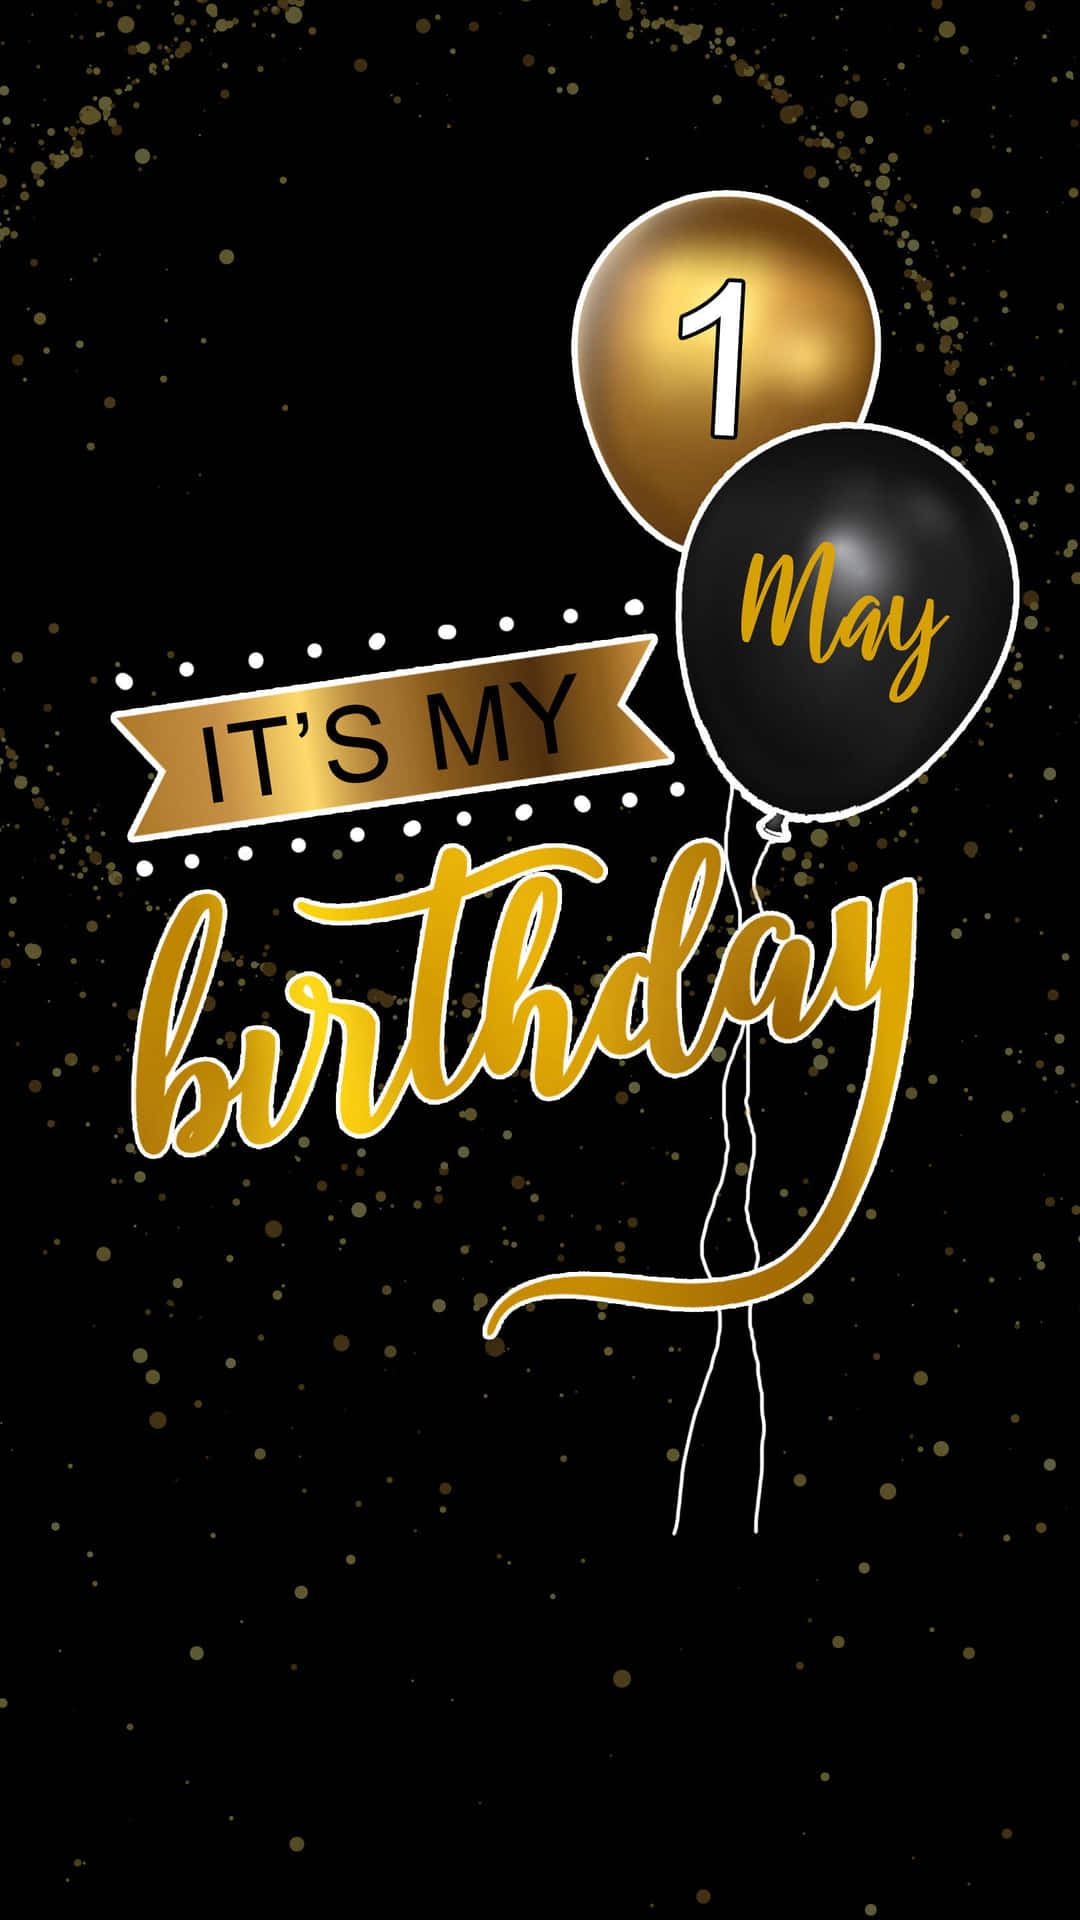 Download May 1 It Is My Birthday In Black And Gold Wallpaper | Wallpapers .com